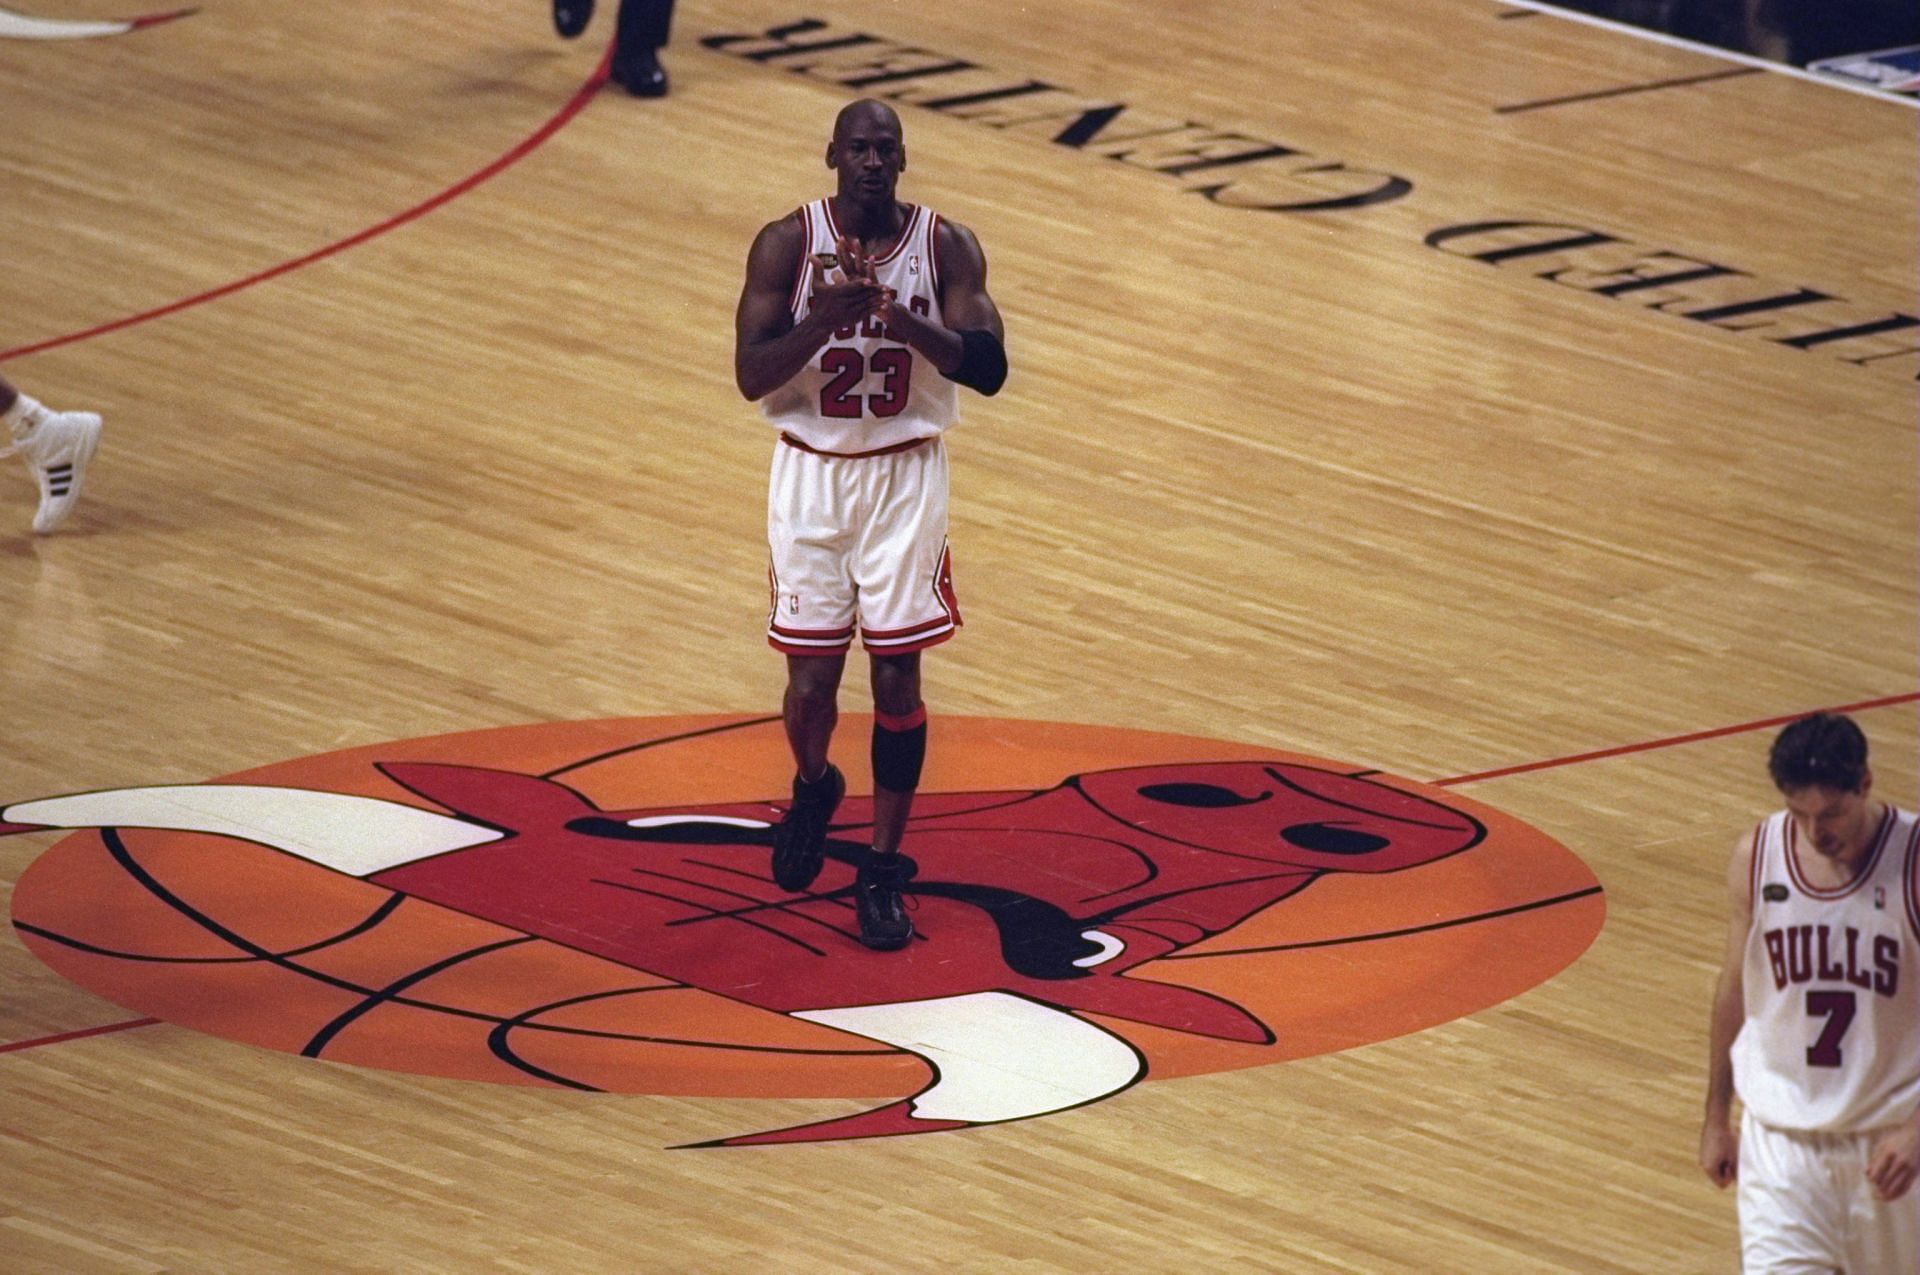 Michael Jordan #23 of the Chicago Bulls walks on the court during the NBA Finals